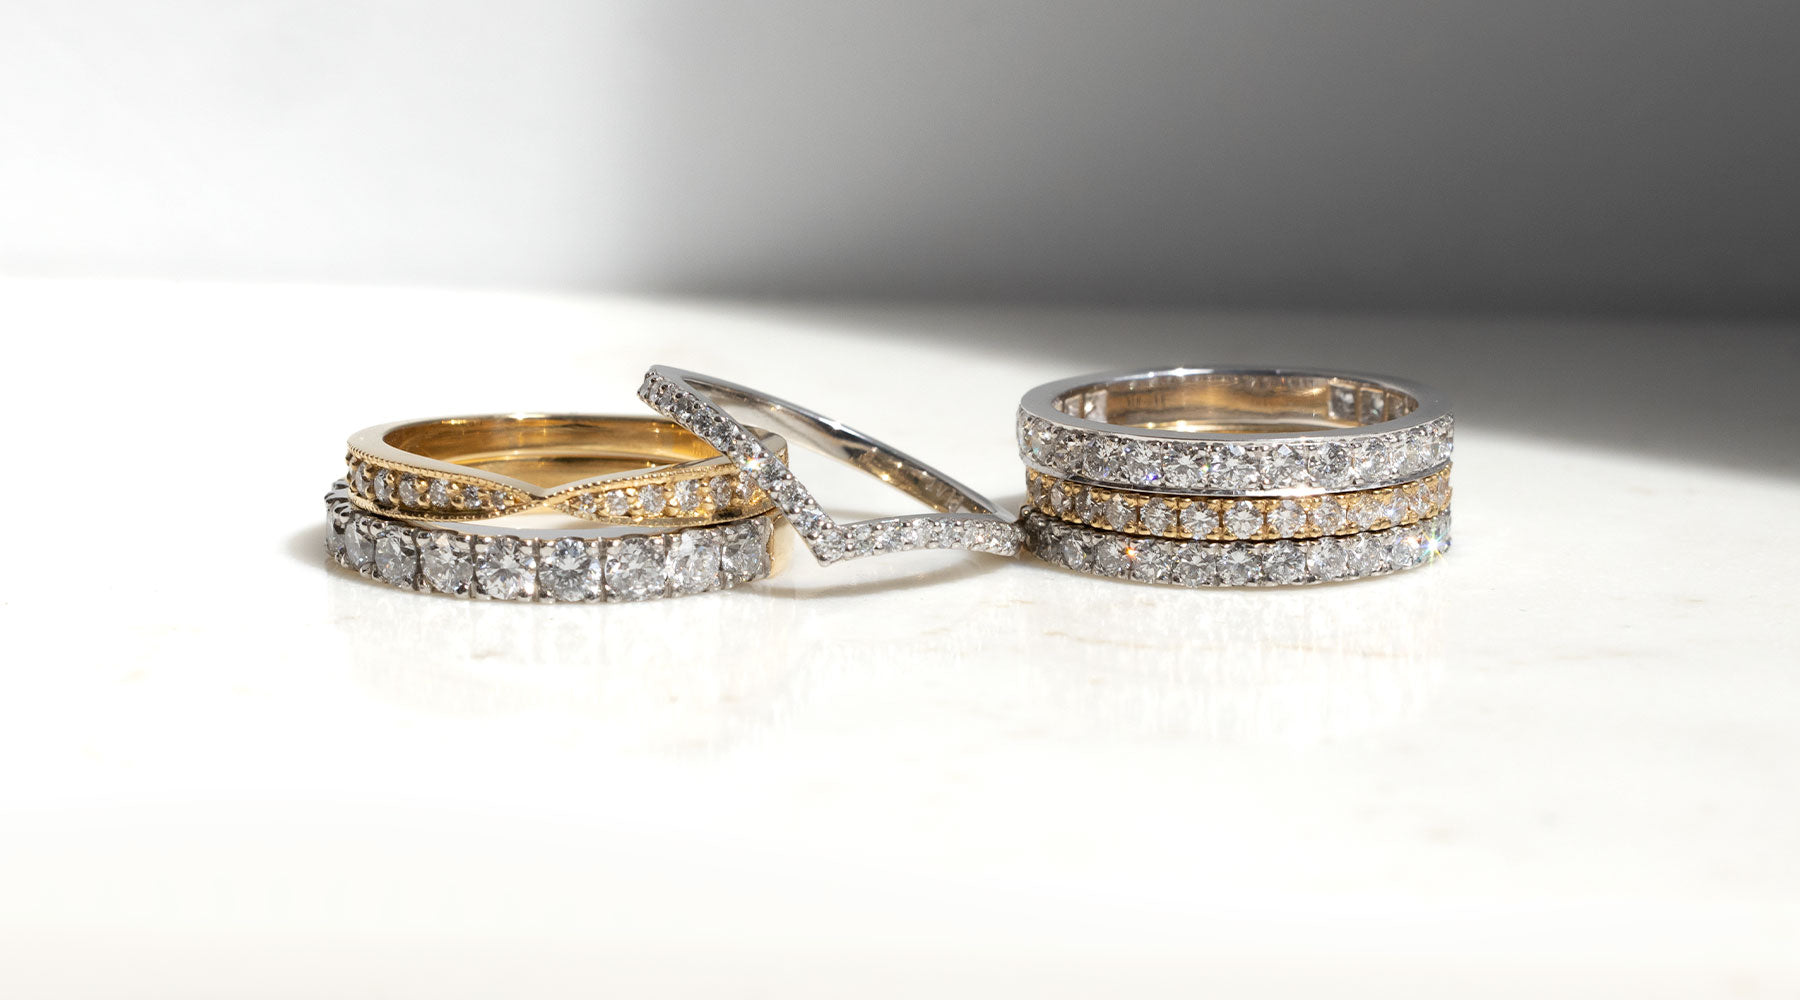 Beyond Tradition: Unique Wedding Rings & Eternity Bands